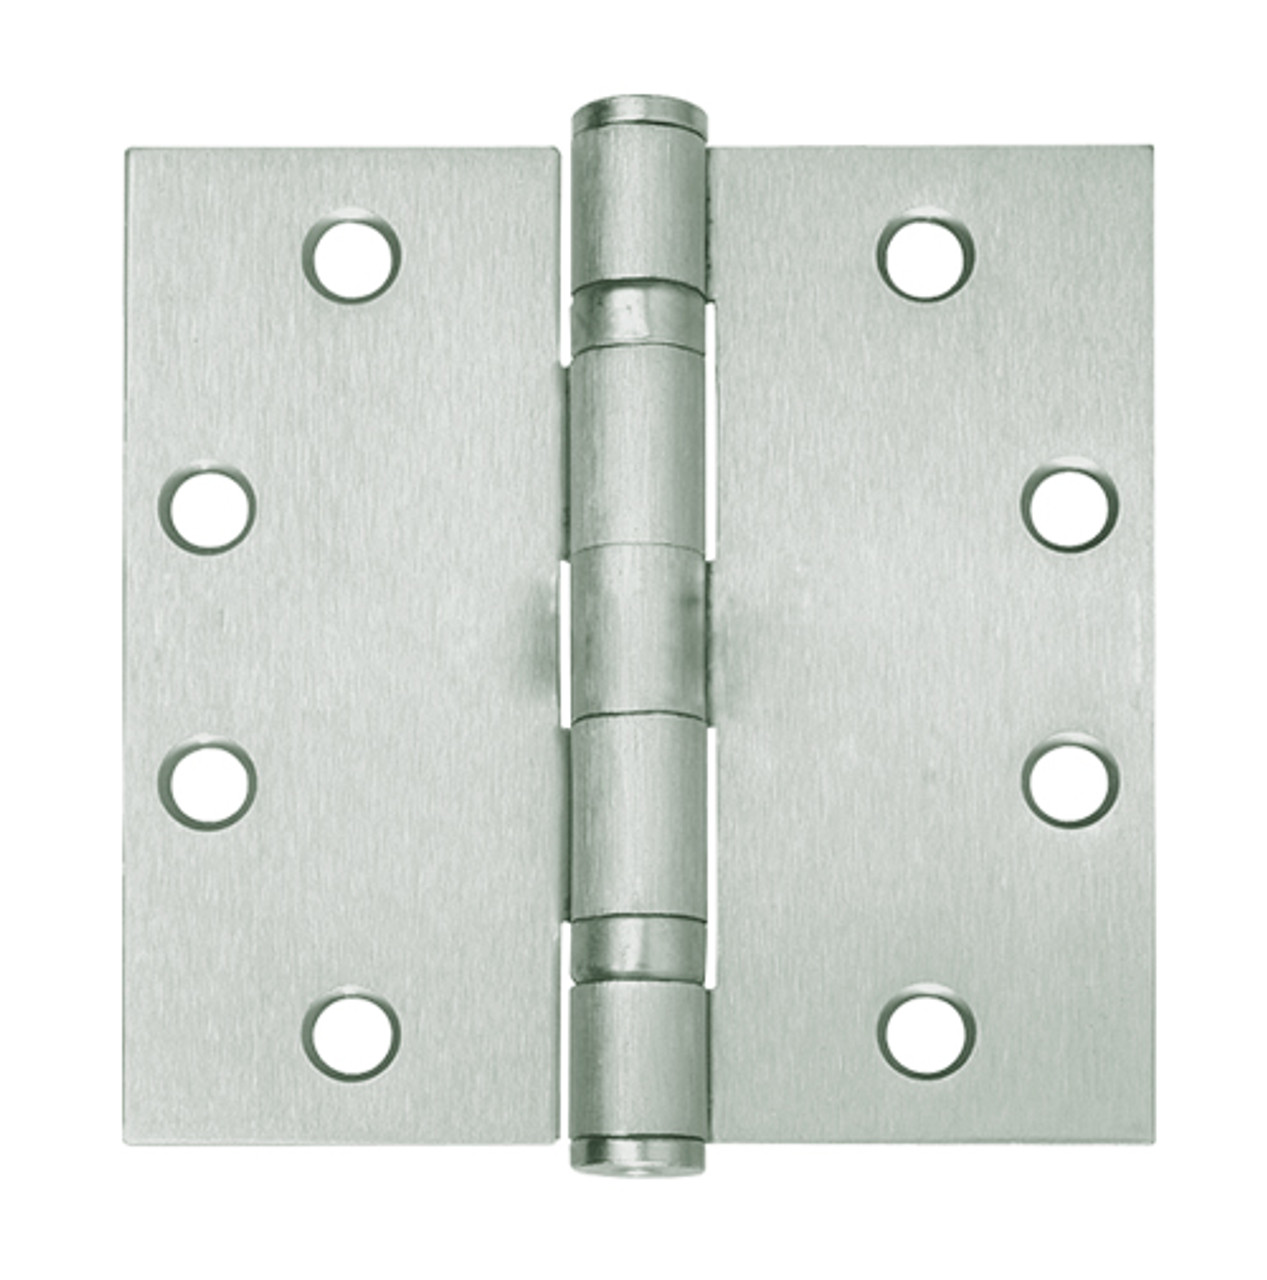 5BB1-5x4-5-619-NRP IVES 5 Knuckle Ball Bearing Full Mortise Hinge in Satin Nickel